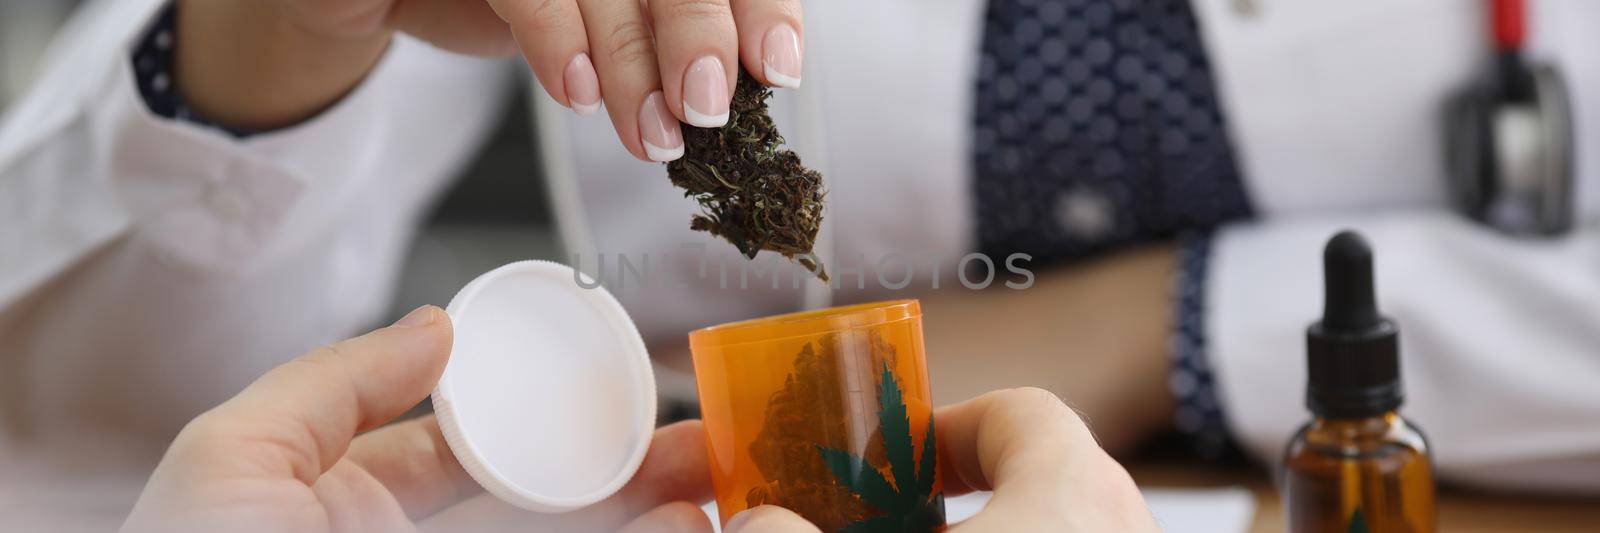 Hospital worker put dried marijuana in plastic container by kuprevich